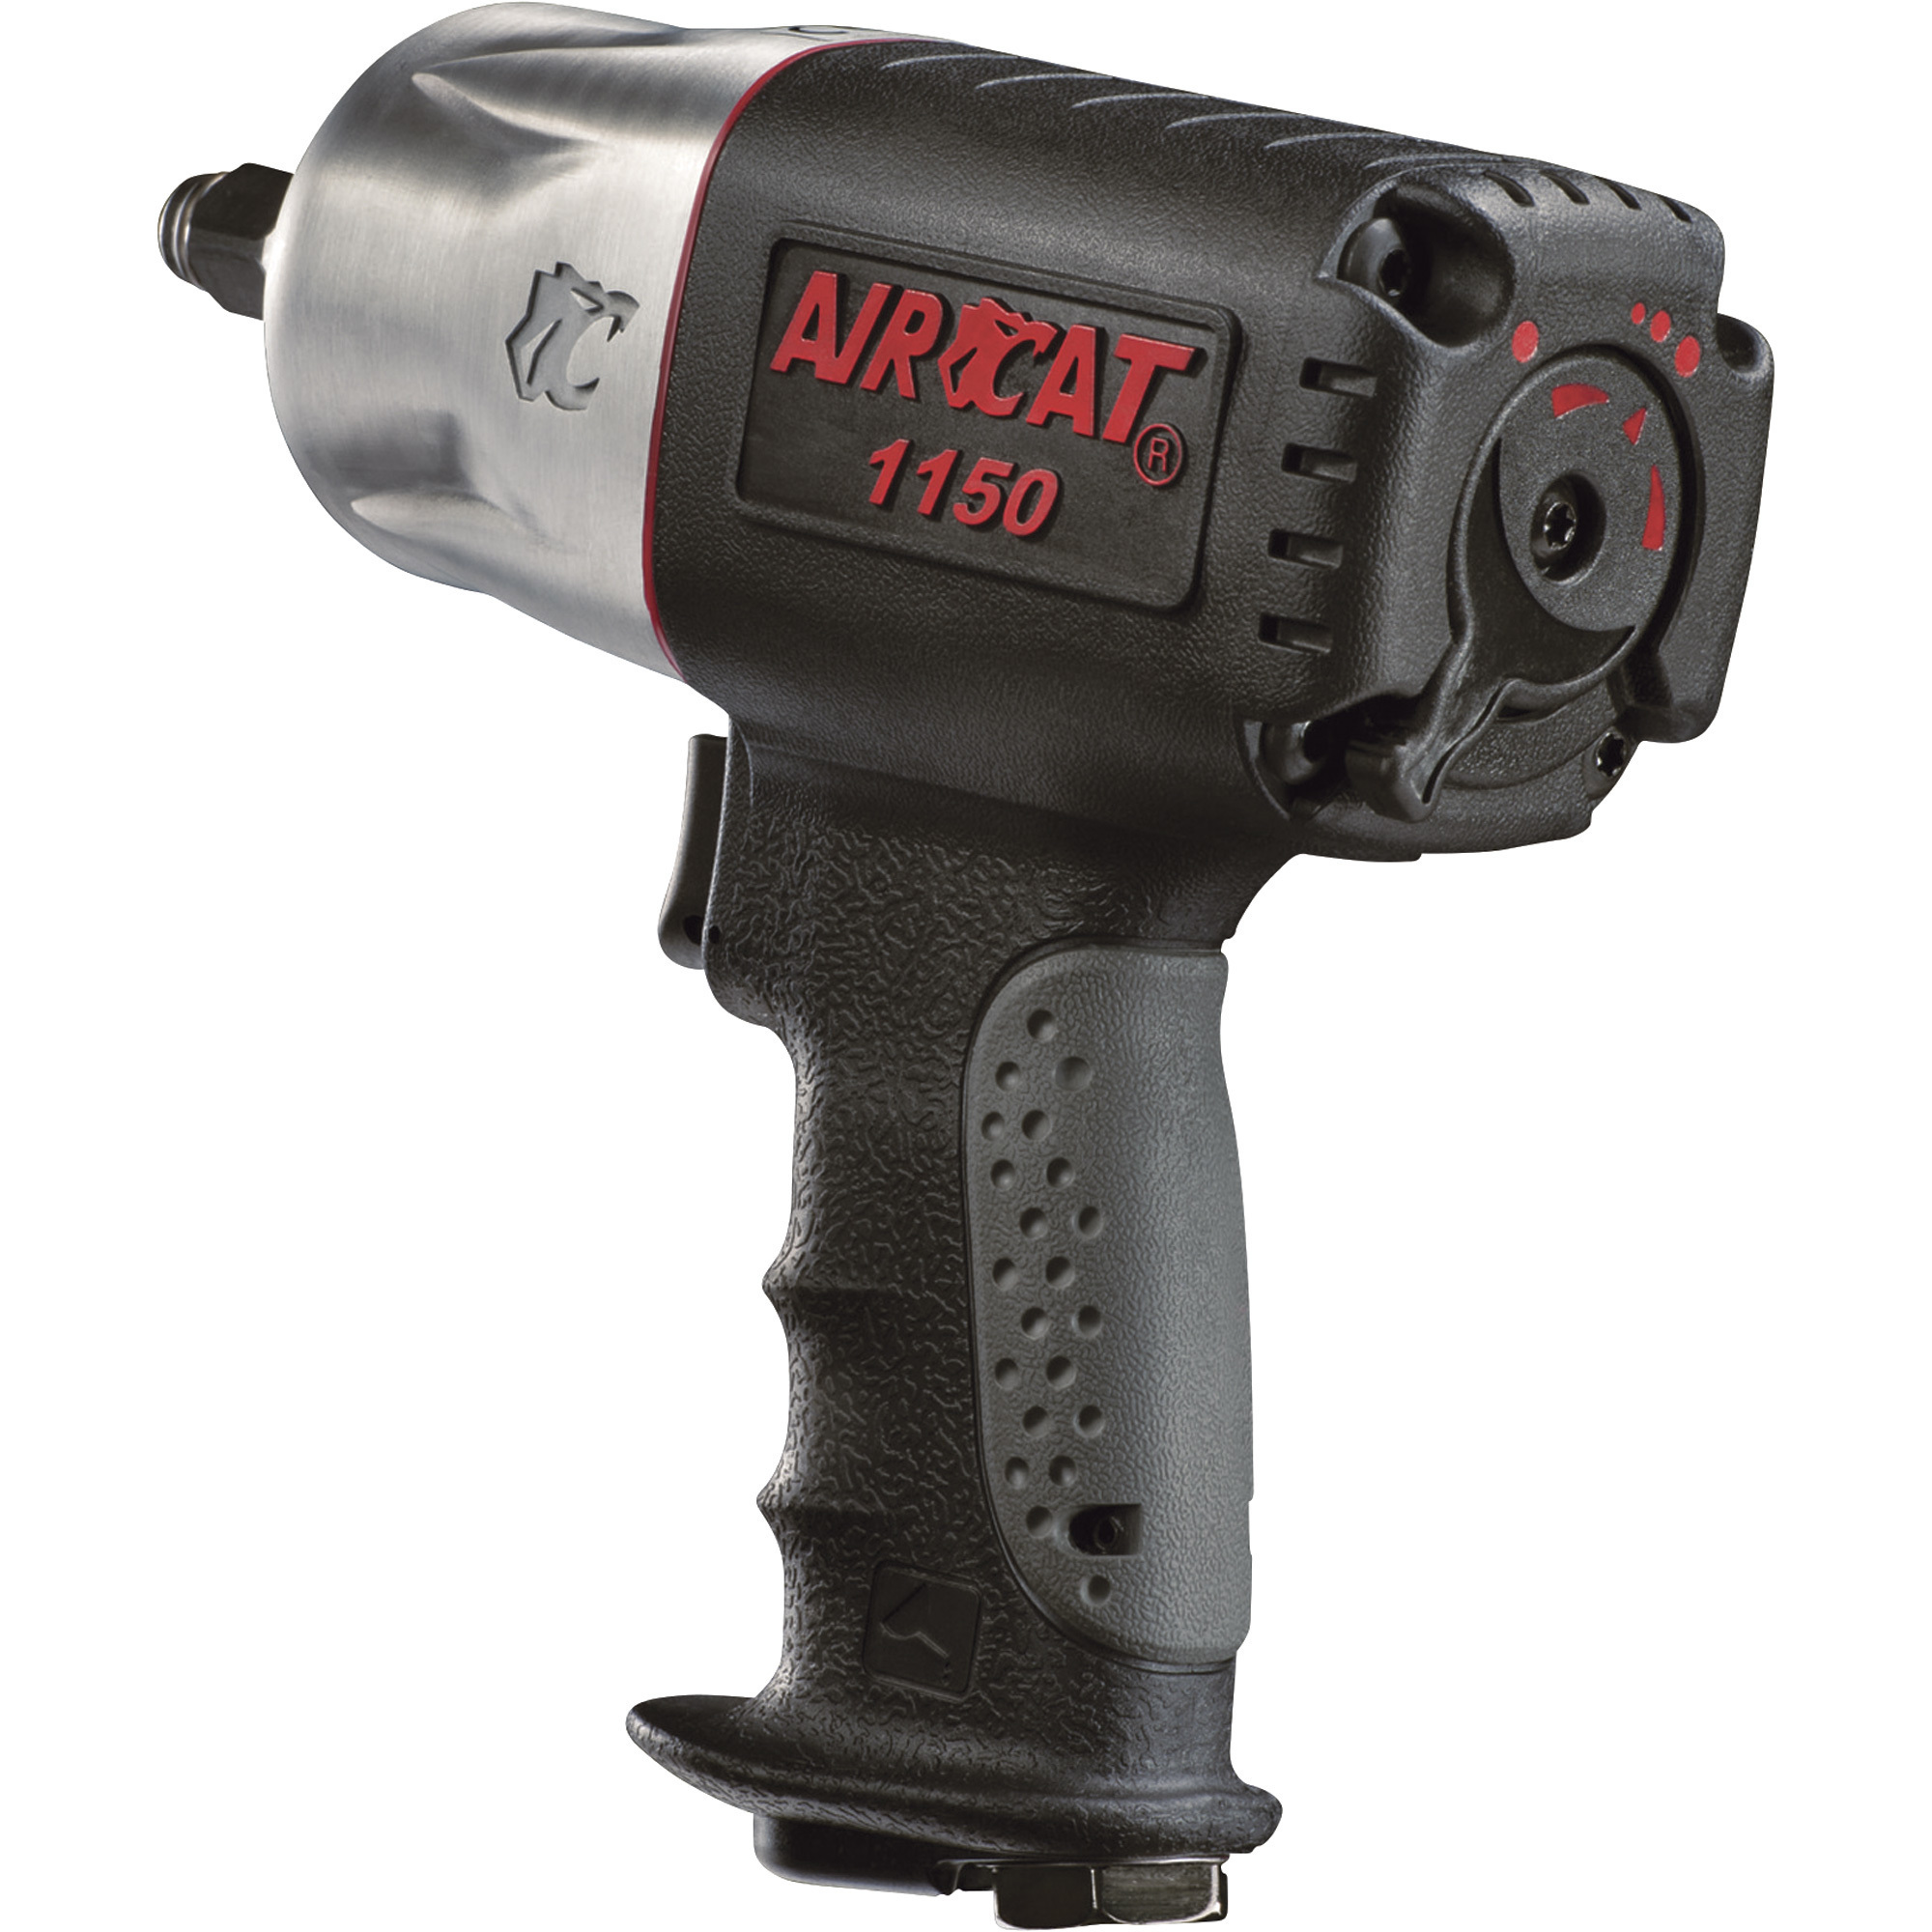 AIRCAT Composite Air Impact Wrench, 1/2Inch Drive, 8 CFM, 1295 Ft./Lbs. Torque, Model 1150